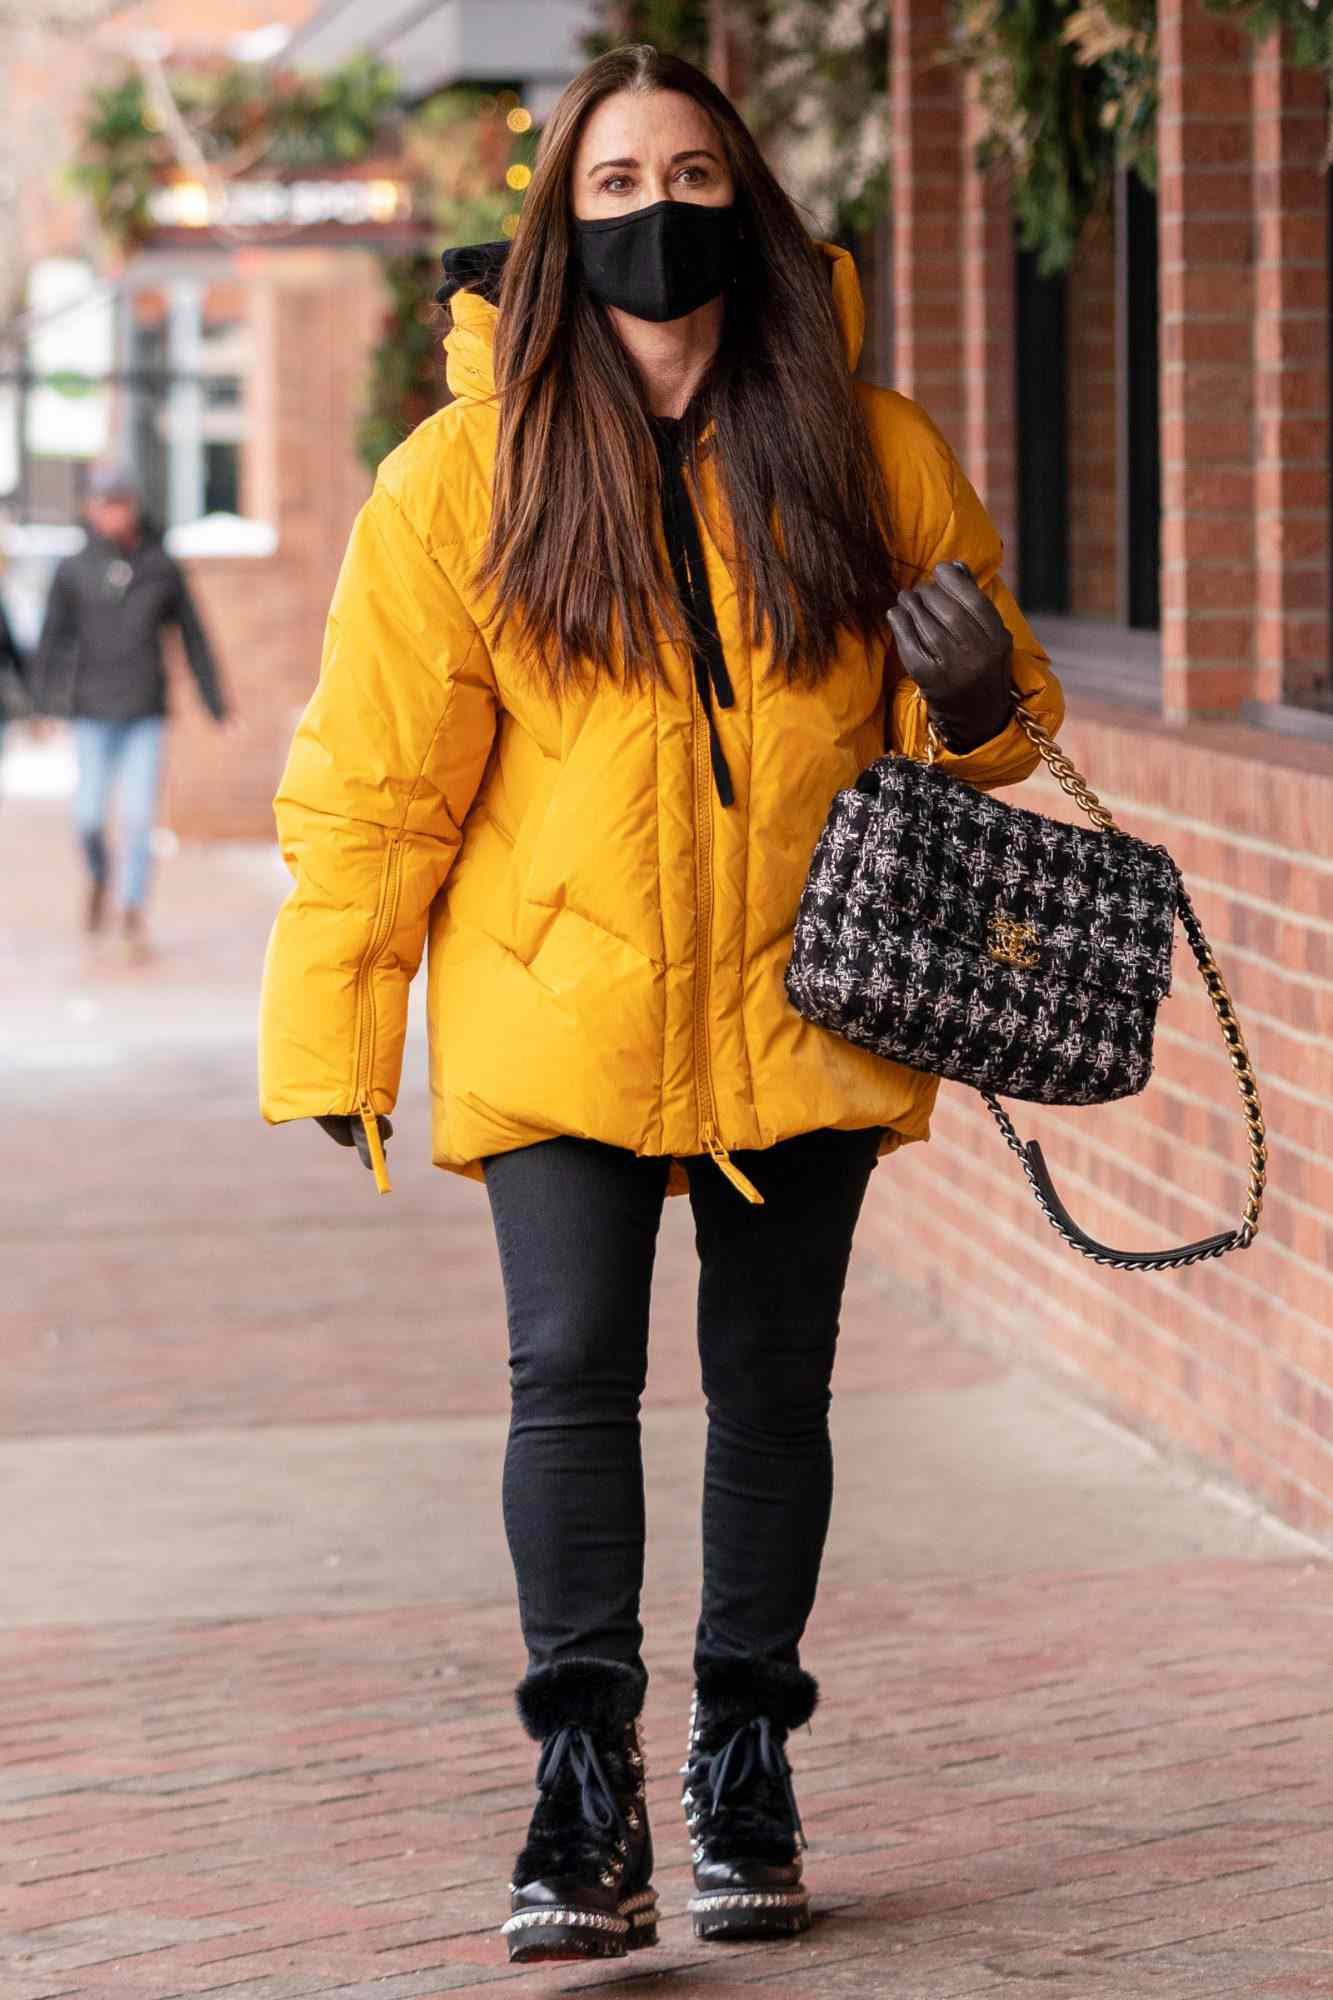 Kyle Richards Spotted Enjoying A Solo Shopping Sunday Afternoon In Downtown Aspen